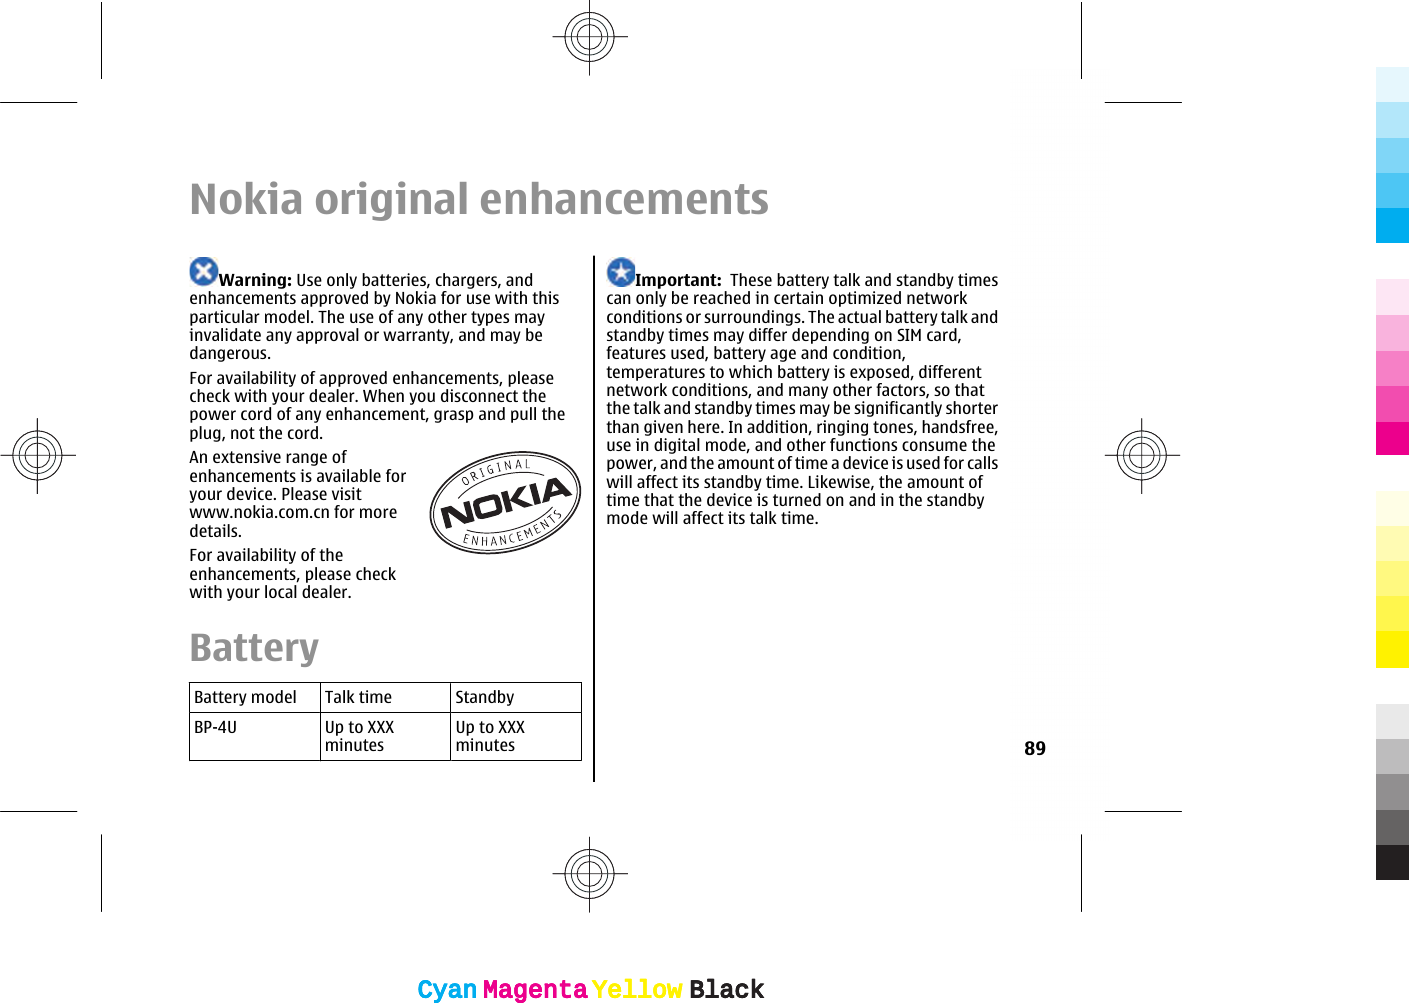 Nokia original enhancementsWarning: Use only batteries, chargers, andenhancements approved by Nokia for use with thisparticular model. The use of any other types mayinvalidate any approval or warranty, and may bedangerous.For availability of approved enhancements, pleasecheck with your dealer. When you disconnect thepower cord of any enhancement, grasp and pull theplug, not the cord.An extensive range ofenhancements is available foryour device. Please visitwww.nokia.com.cn for moredetails.For availability of theenhancements, please checkwith your local dealer.BatteryBattery model Talk time StandbyBP-4U Up to XXXminutesUp to XXXminutesImportant:  These battery talk and standby timescan only be reached in certain optimized networkconditions or surroundings. The actual battery talk andstandby times may differ depending on SIM card,features used, battery age and condition,temperatures to which battery is exposed, differentnetwork conditions, and many other factors, so thatthe talk and standby times may be significantly shorterthan given here. In addition, ringing tones, handsfree,use in digital mode, and other functions consume thepower, and the amount of time a device is used for callswill affect its standby time. Likewise, the amount oftime that the device is turned on and in the standbymode will affect its talk time.89CyanCyanMagentaMagentaYellowYellowBlackBlackCyanCyanMagentaMagentaYellowYellowBlackBlack